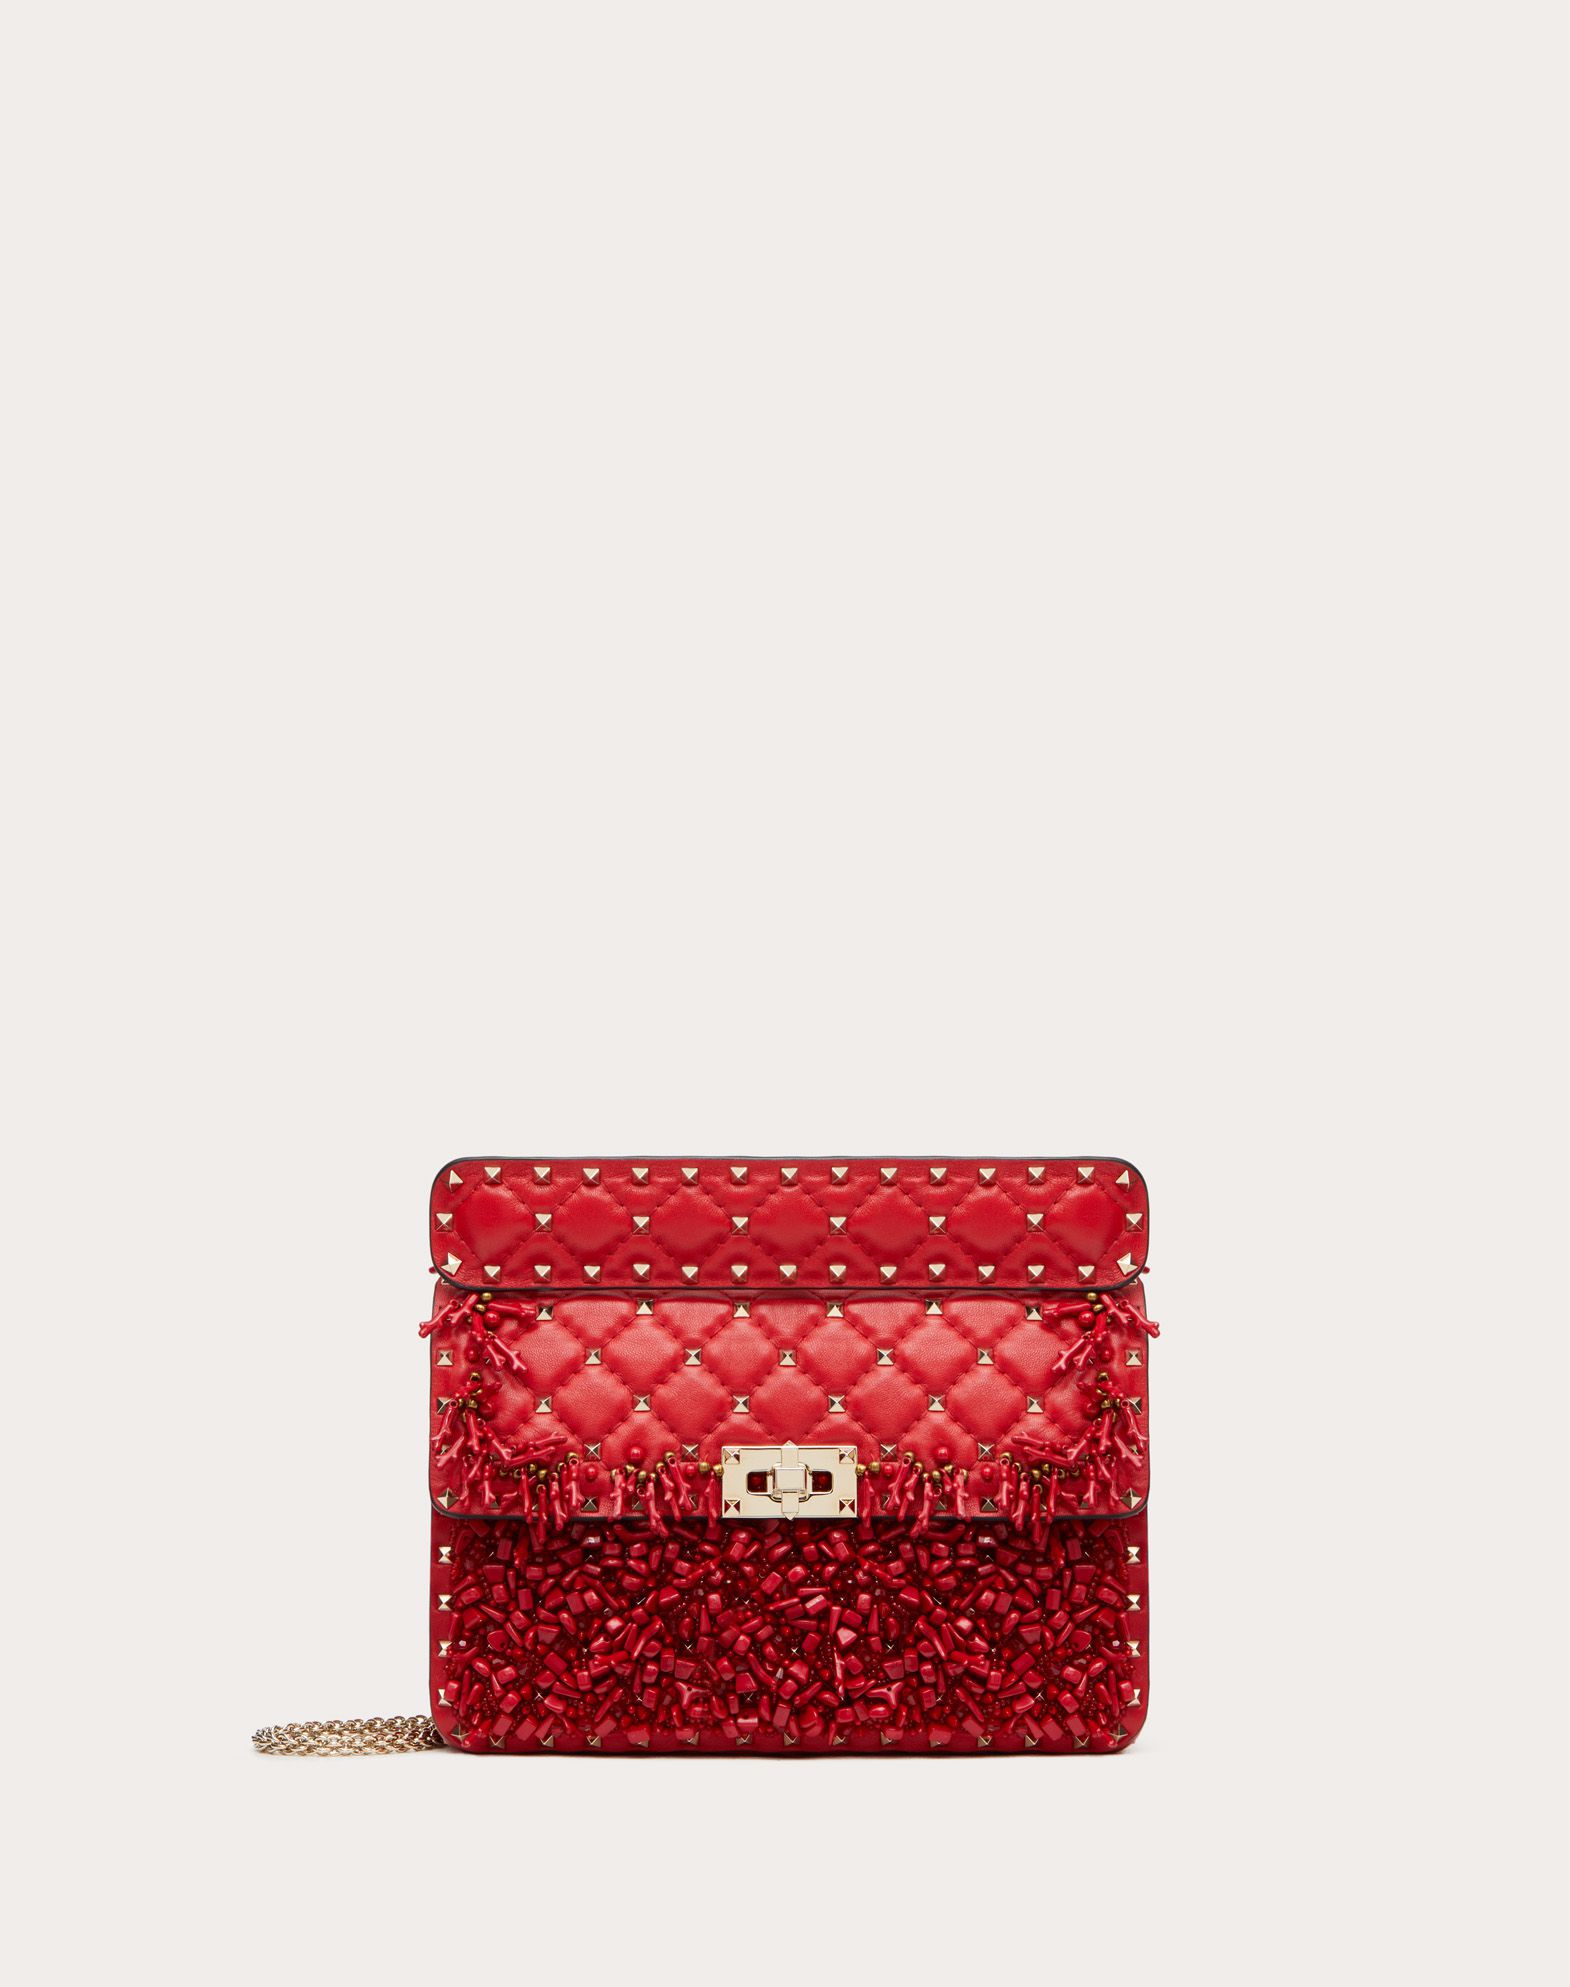 Valentino Garavani Medium Rockstud Spike.it Bag With Coral Embroidery In Rouge Pur